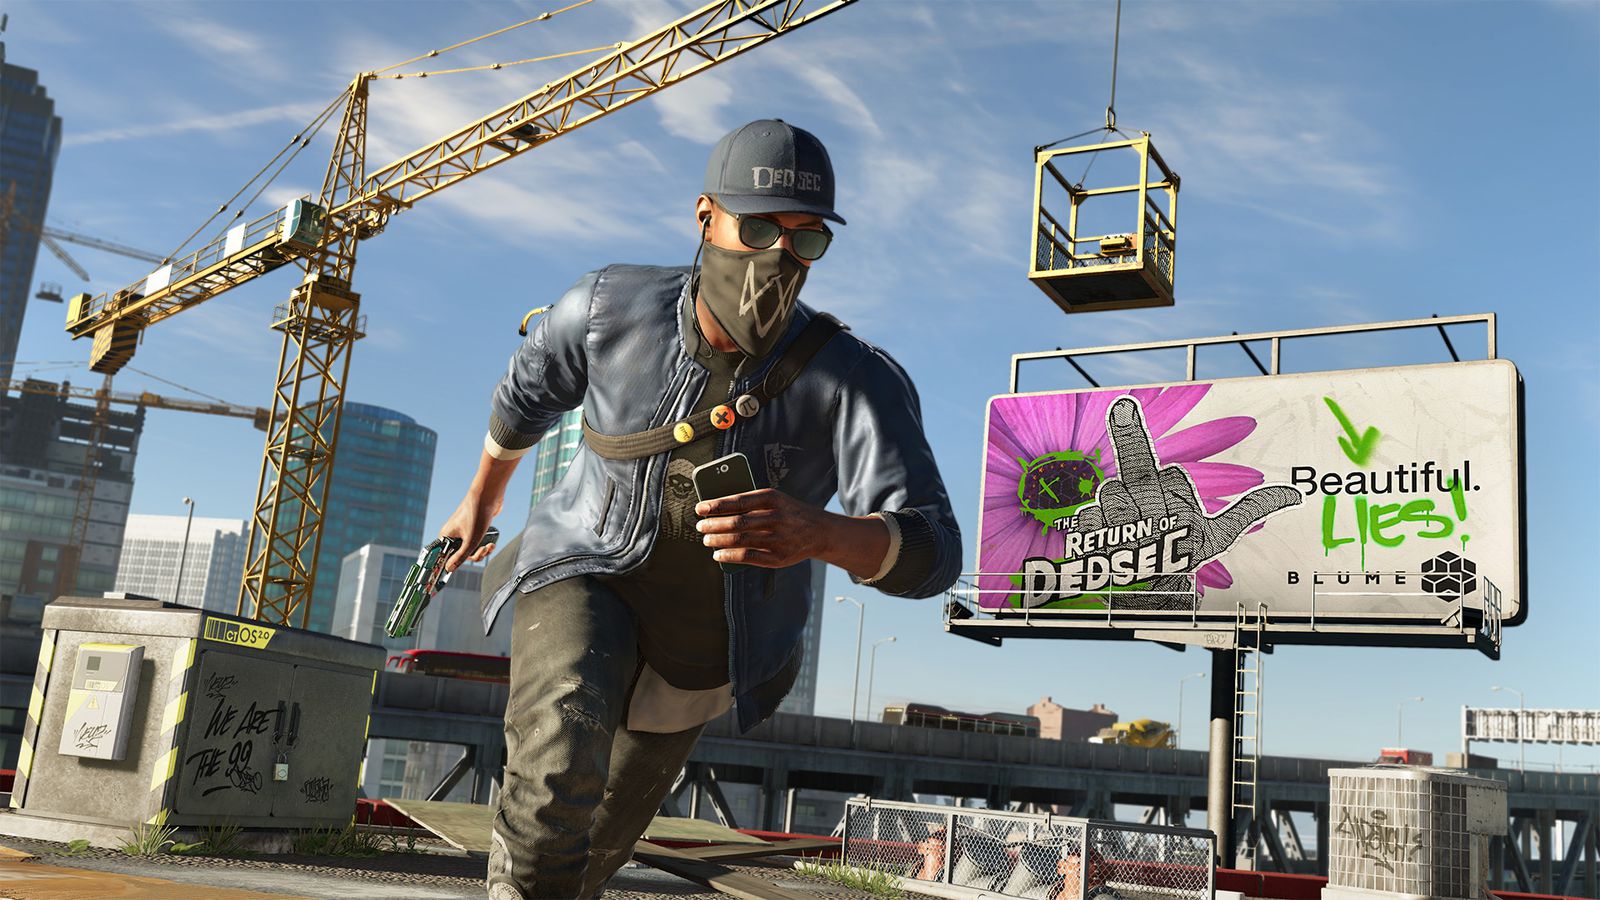 Watch Dogs 2 PC Version Game Free Download